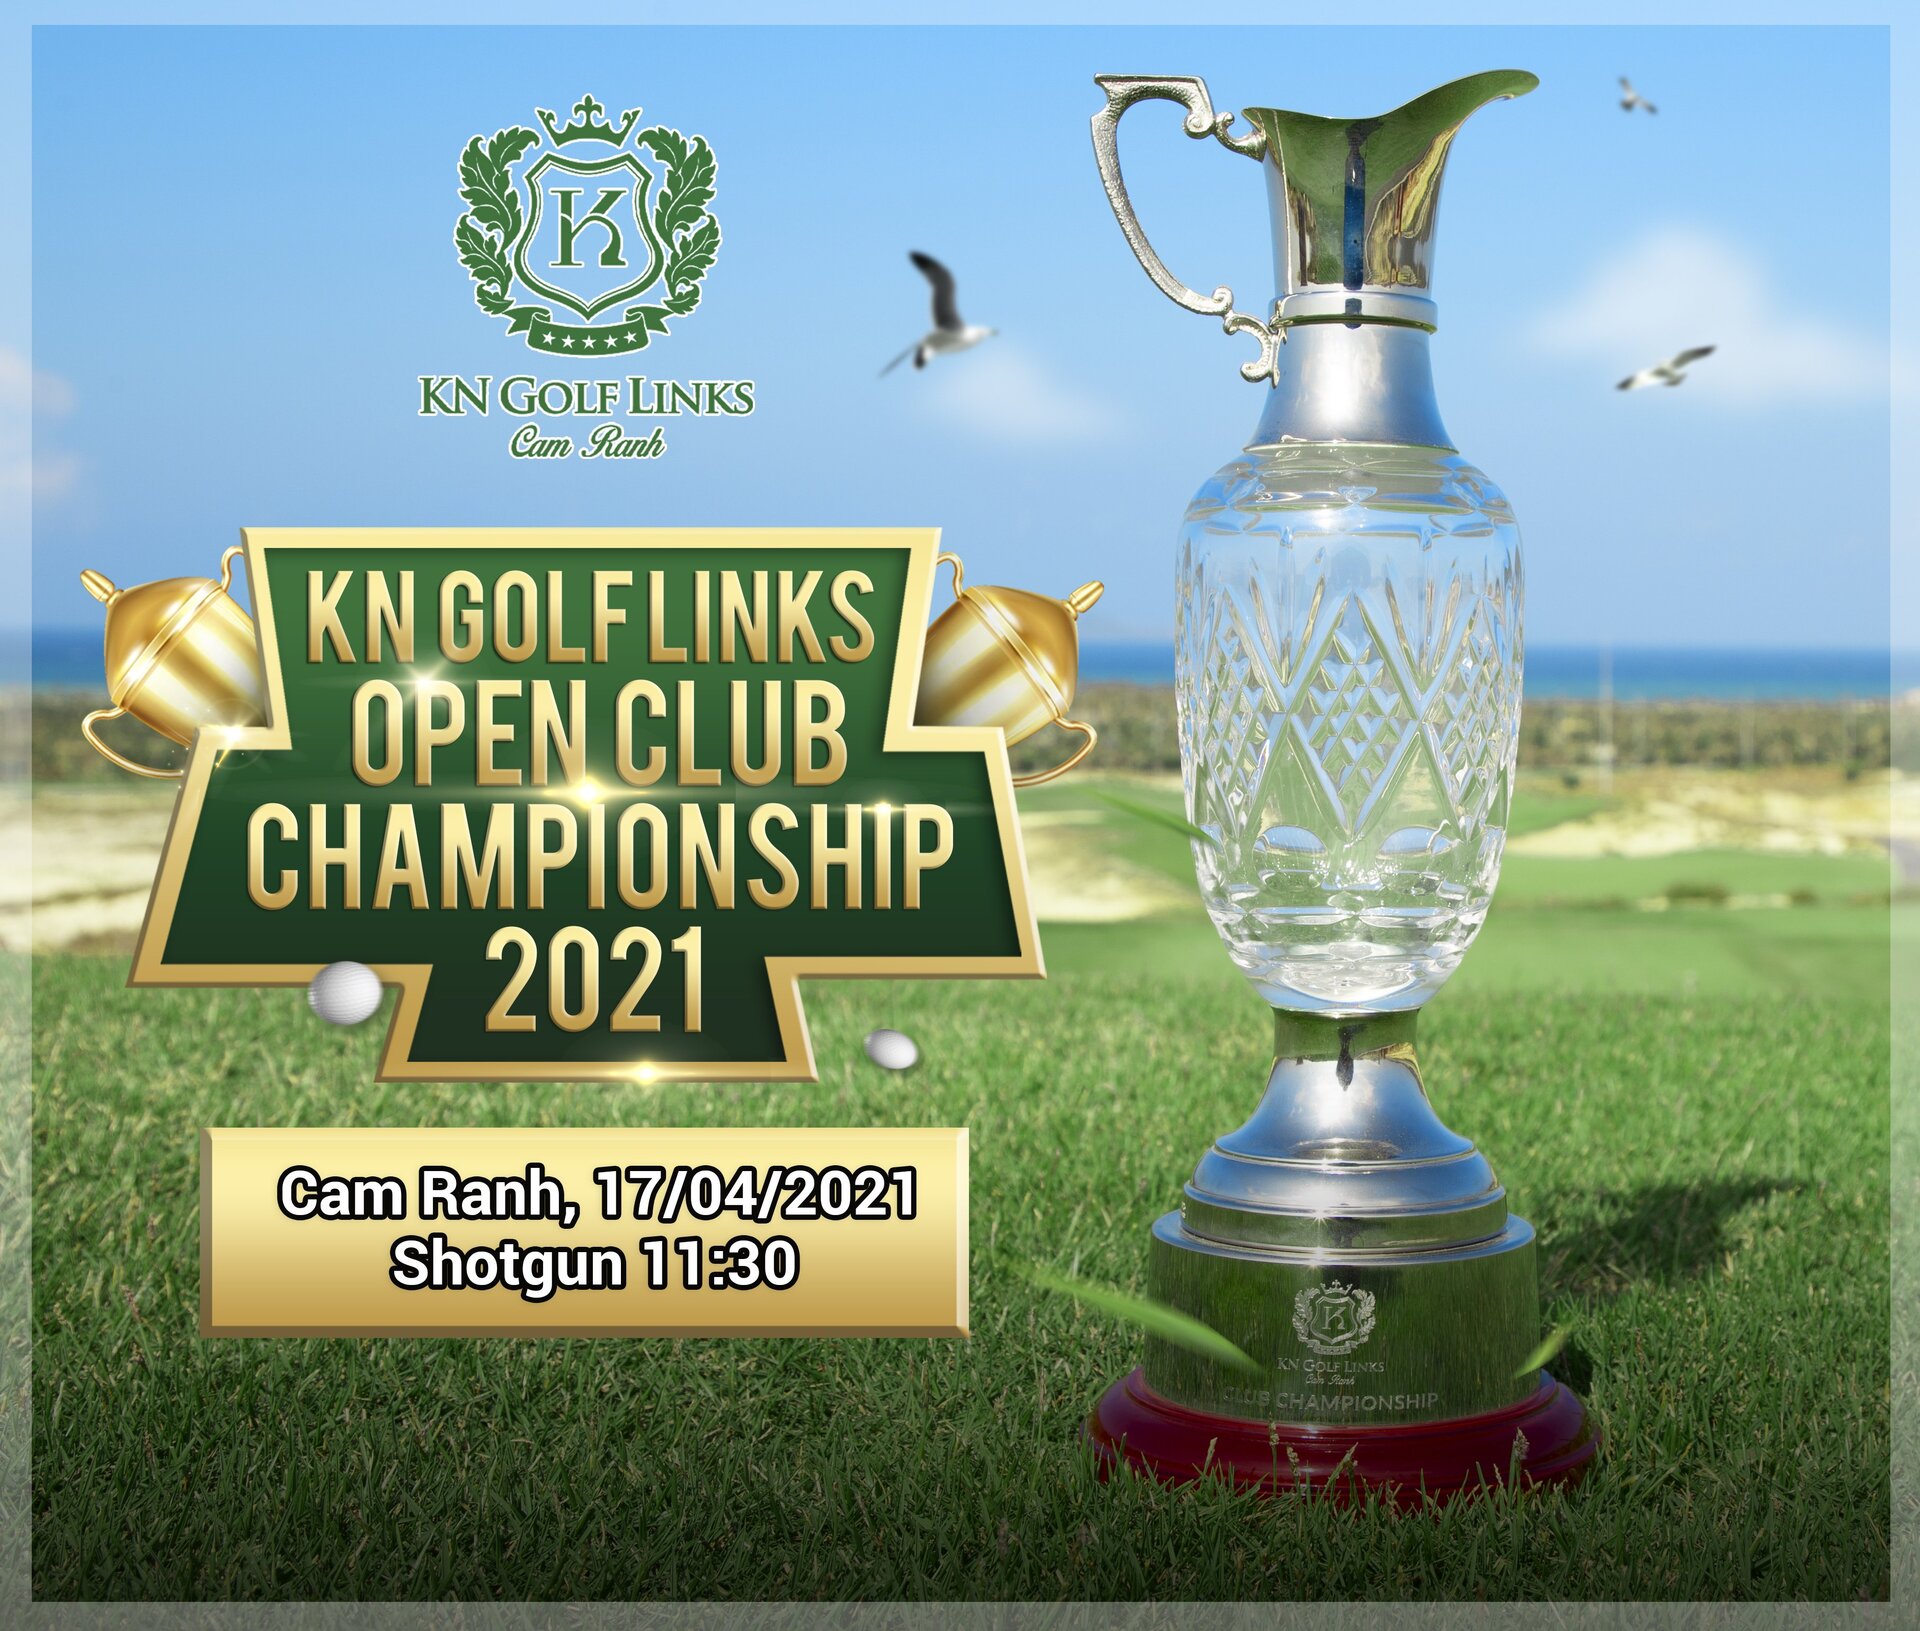 KN Golf Links Open Club Championship 2021 will be organized on 17/4/2021